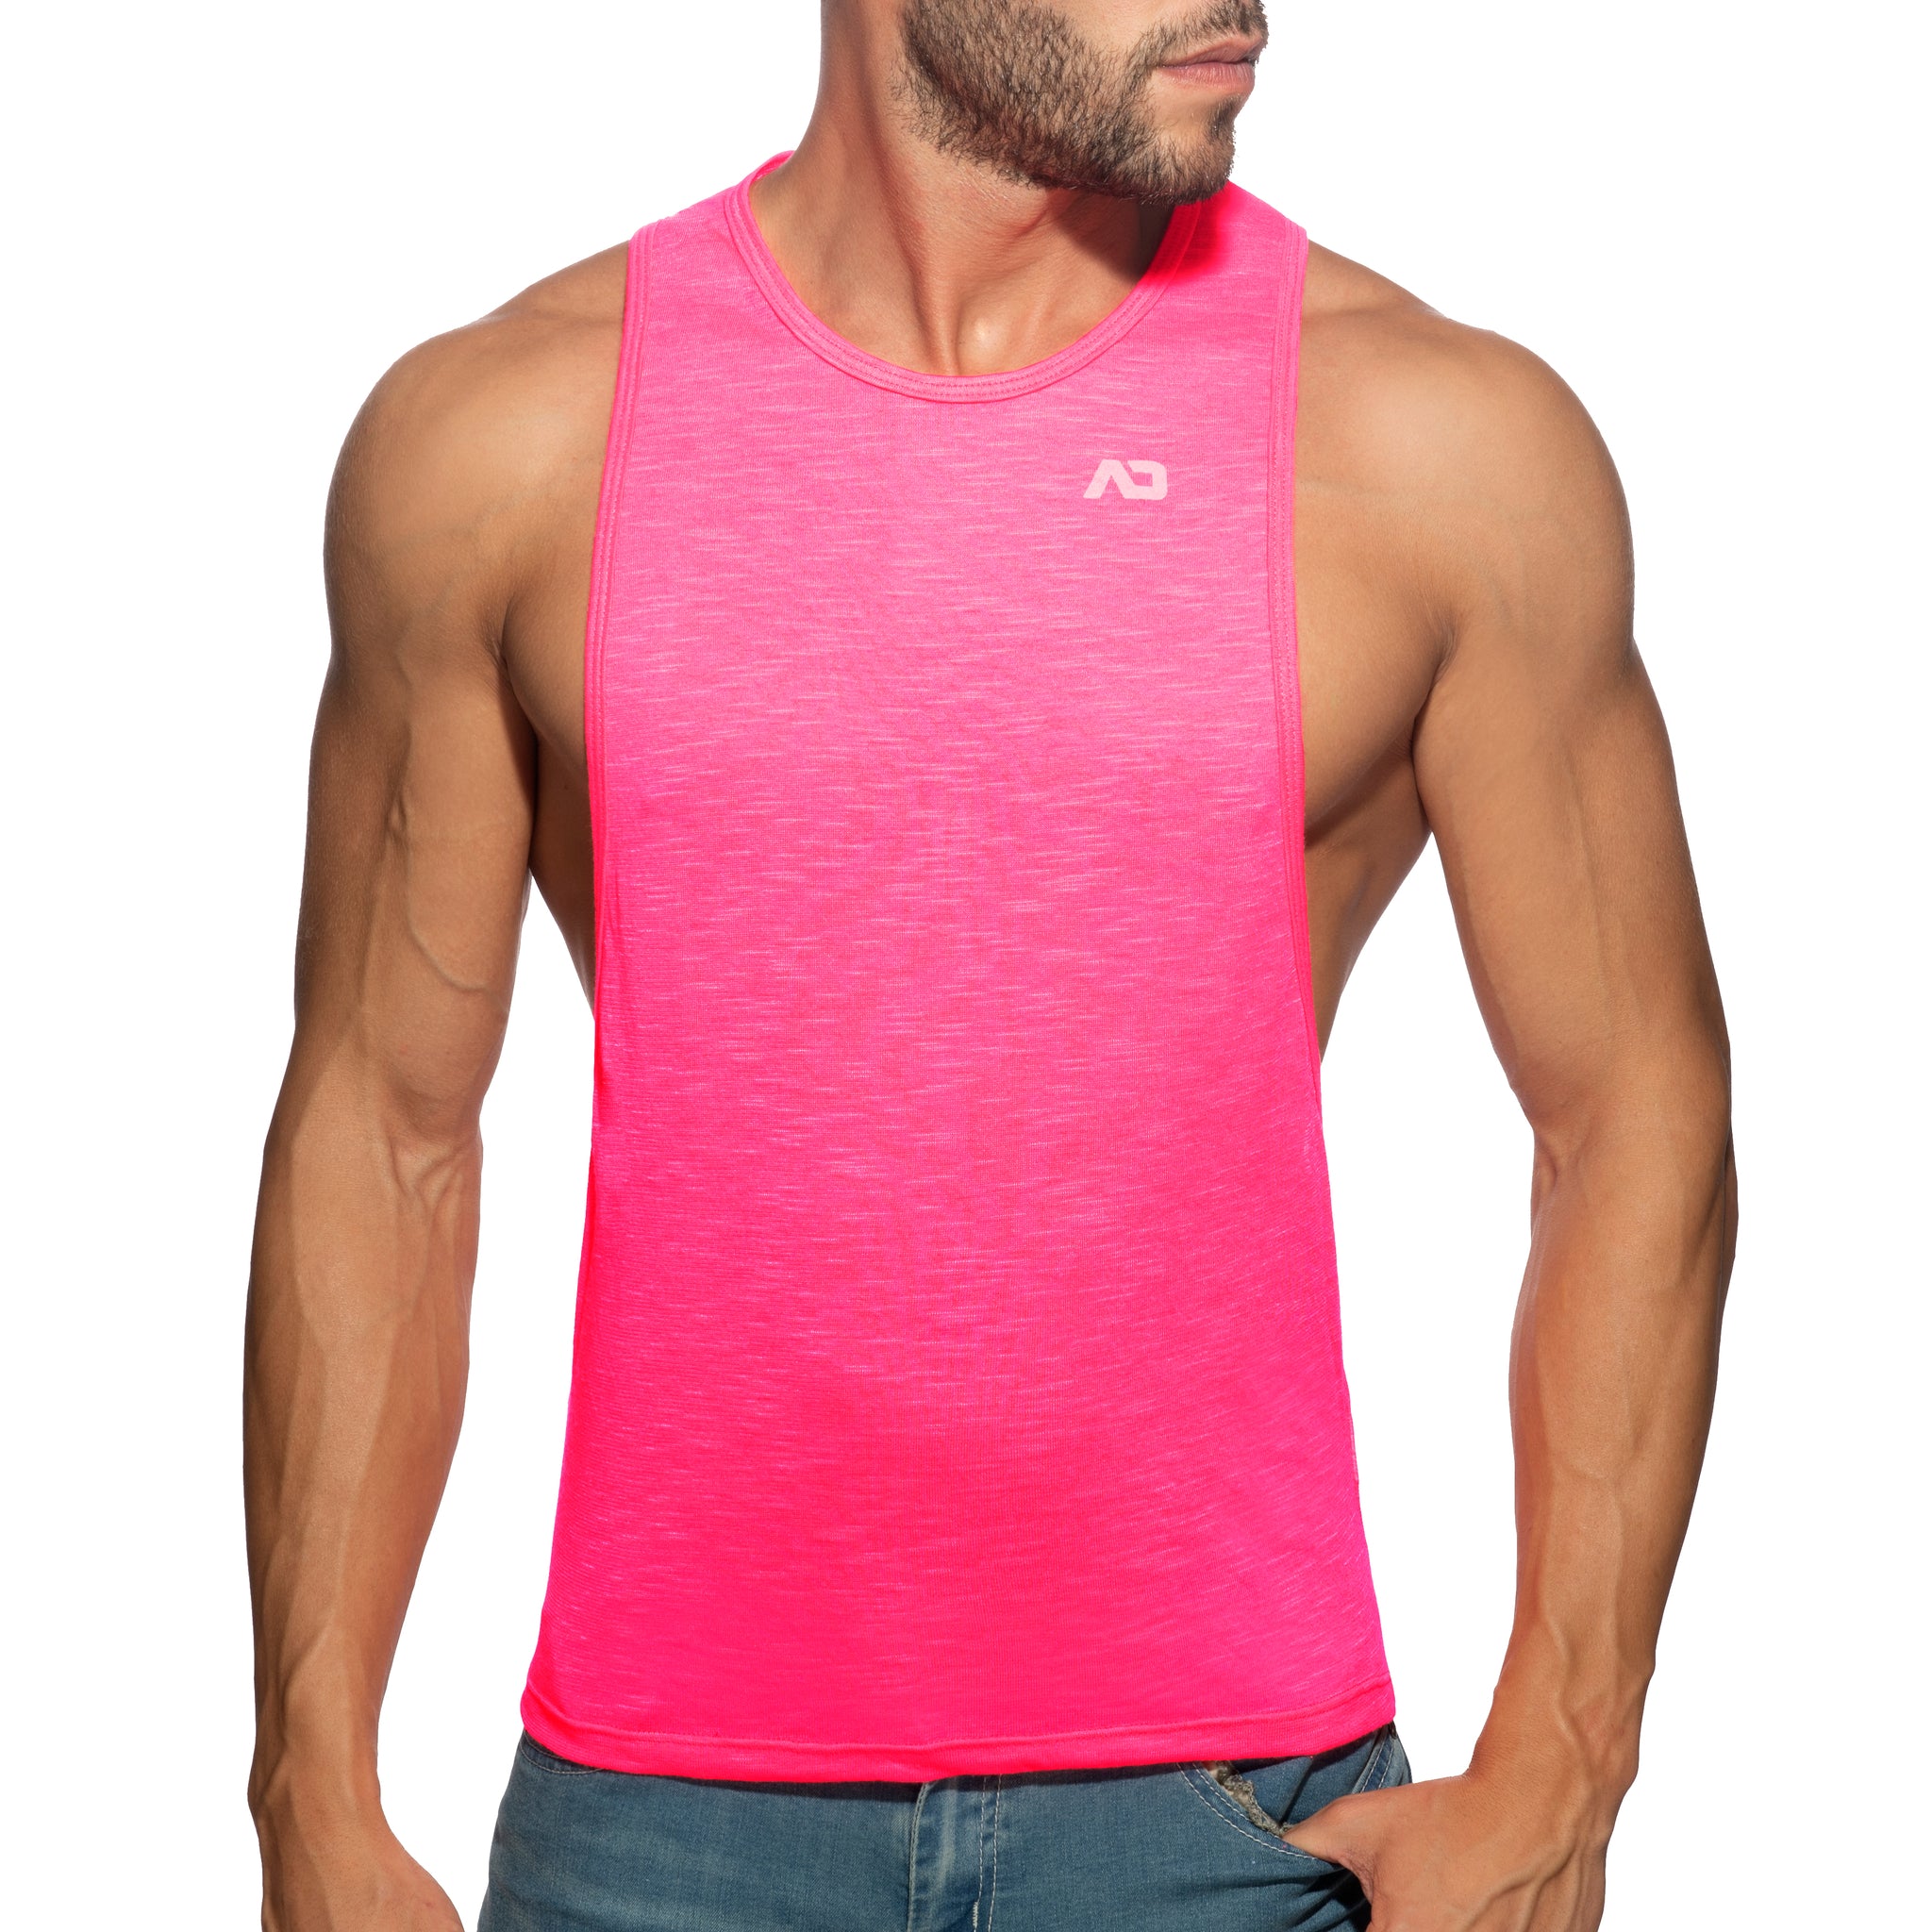 Addicted Thin Flame Low Rider Neon Pink AD1108